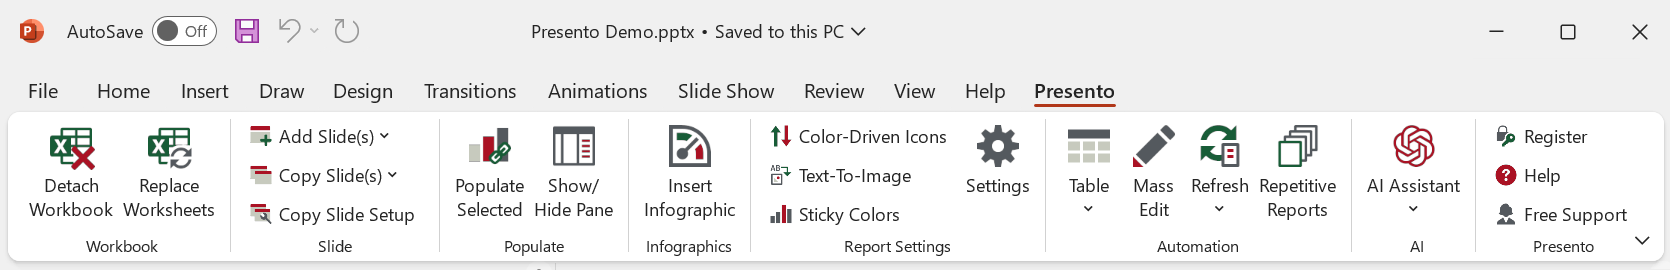 The Presento Ribbon Tab in PowerPoint